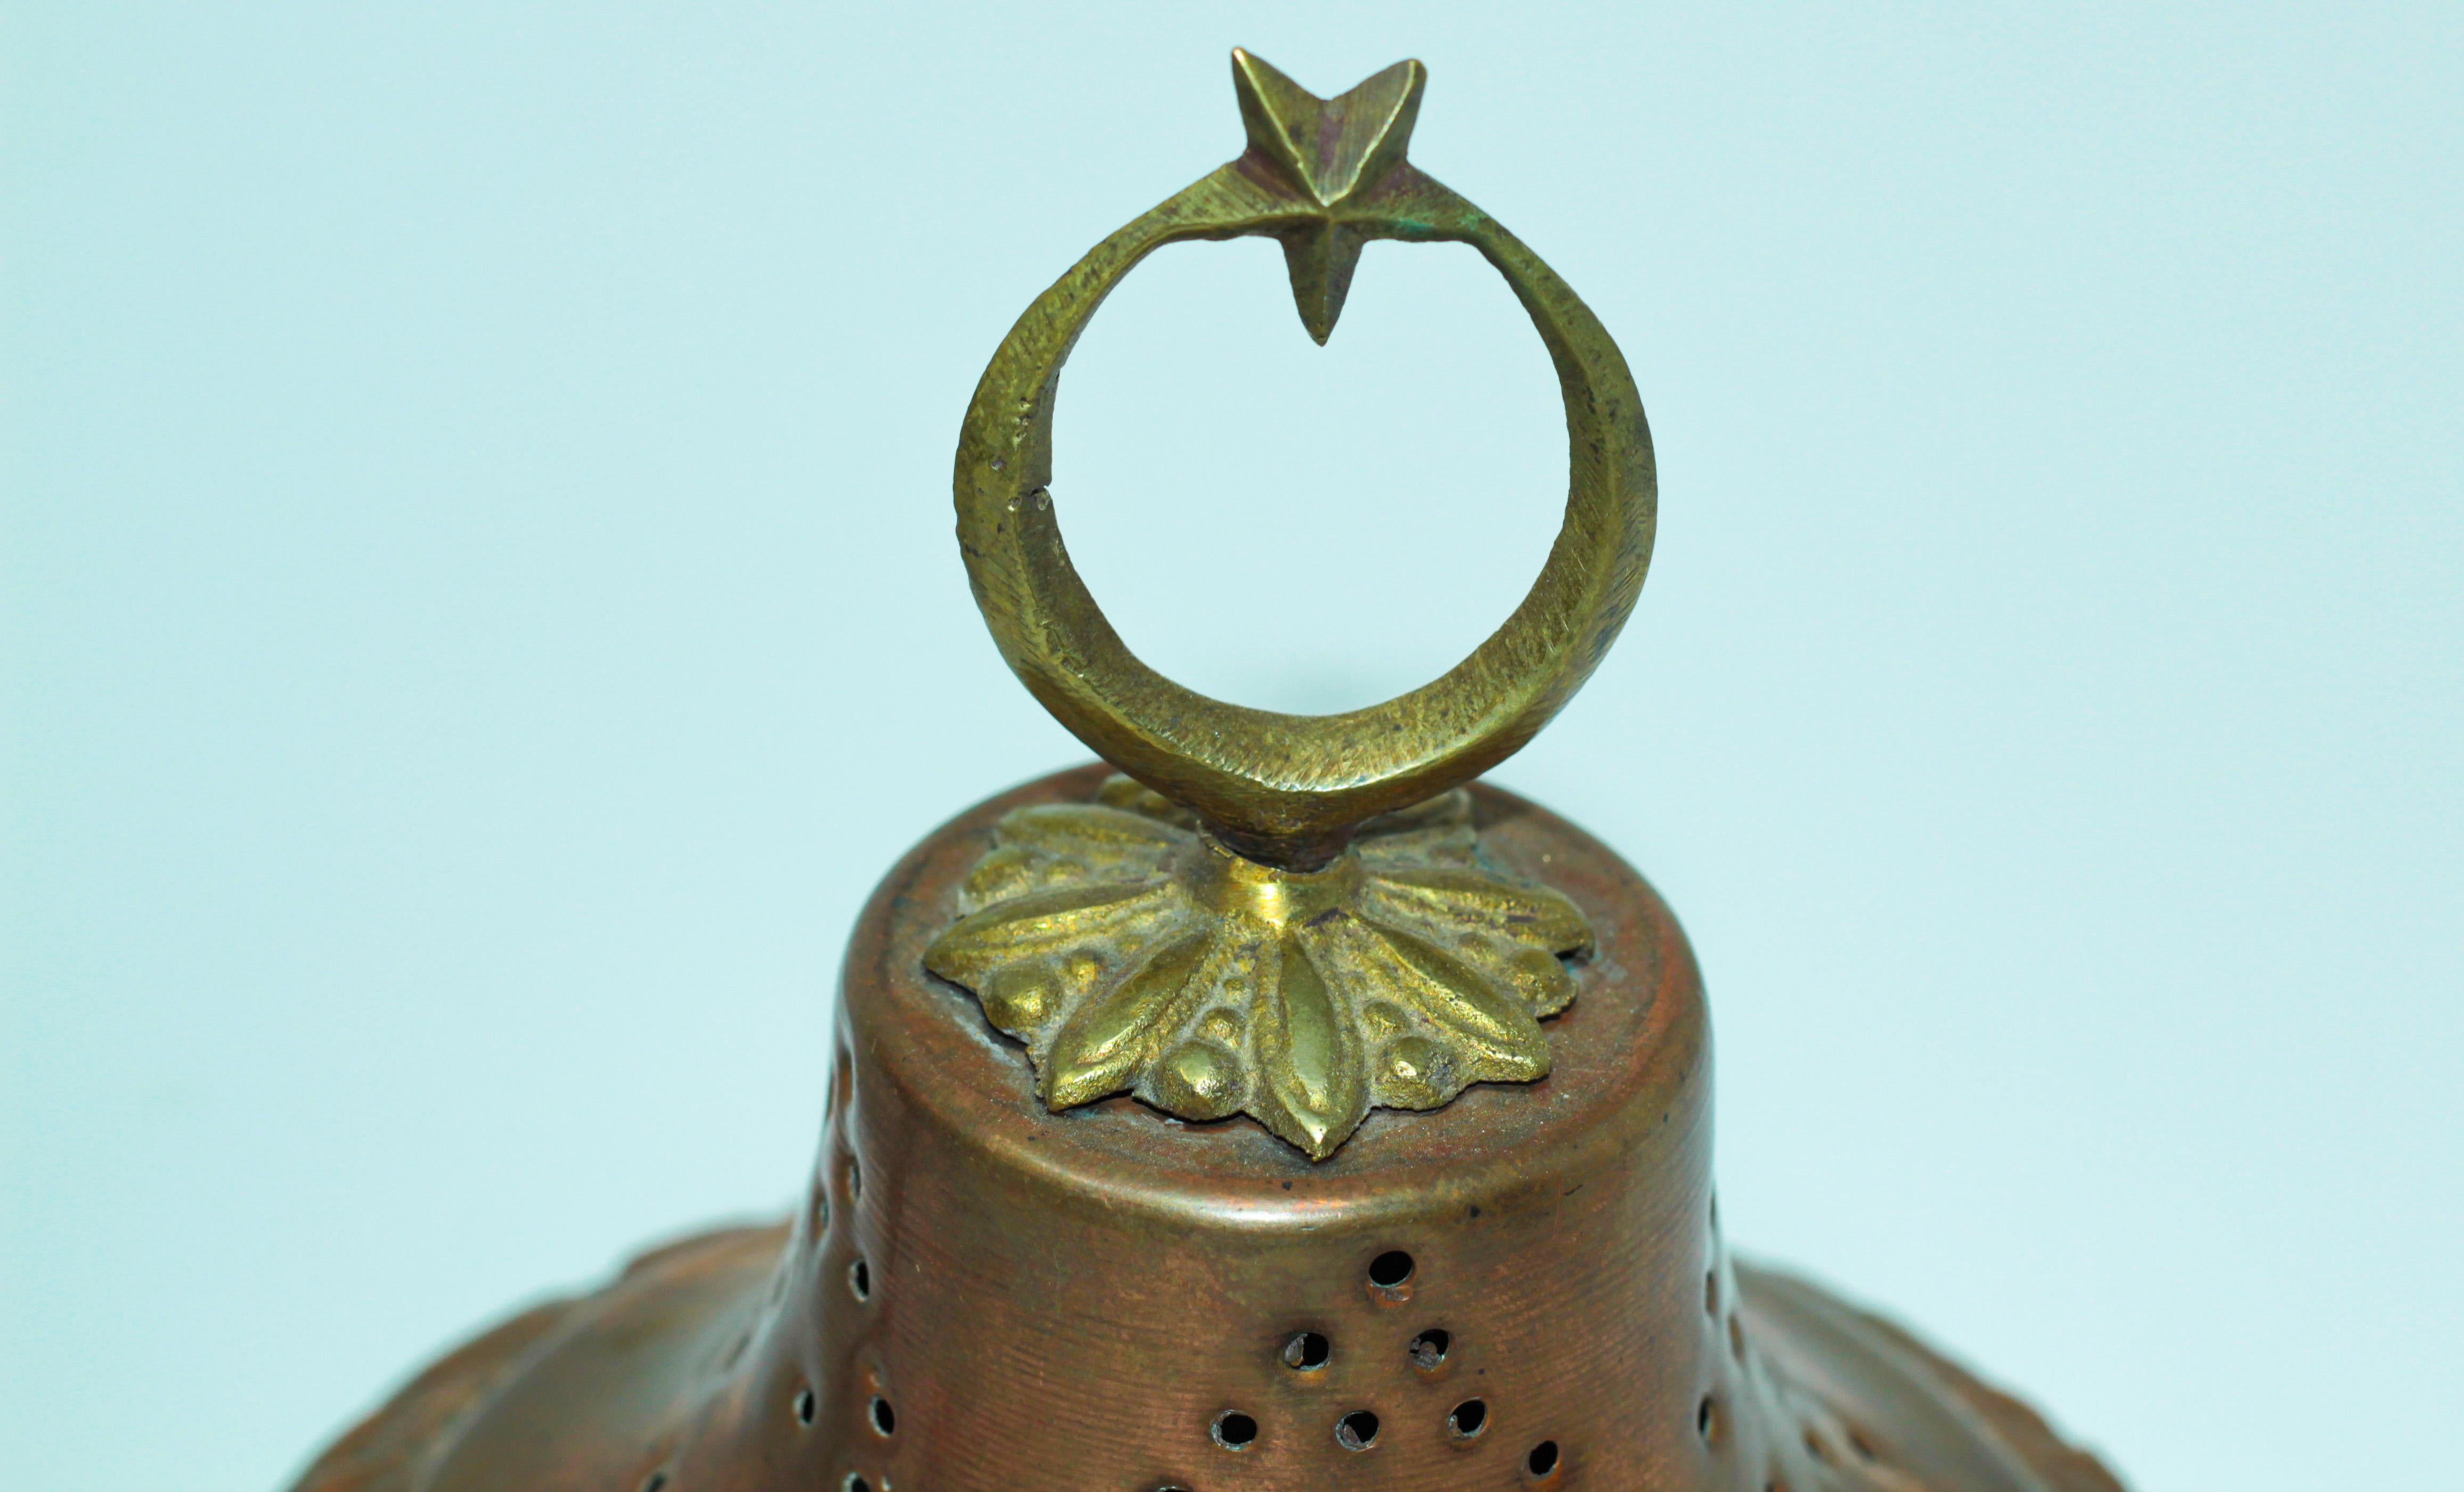 Brass Polished Copper Footed Incense Burner with Crescent Moon and Star